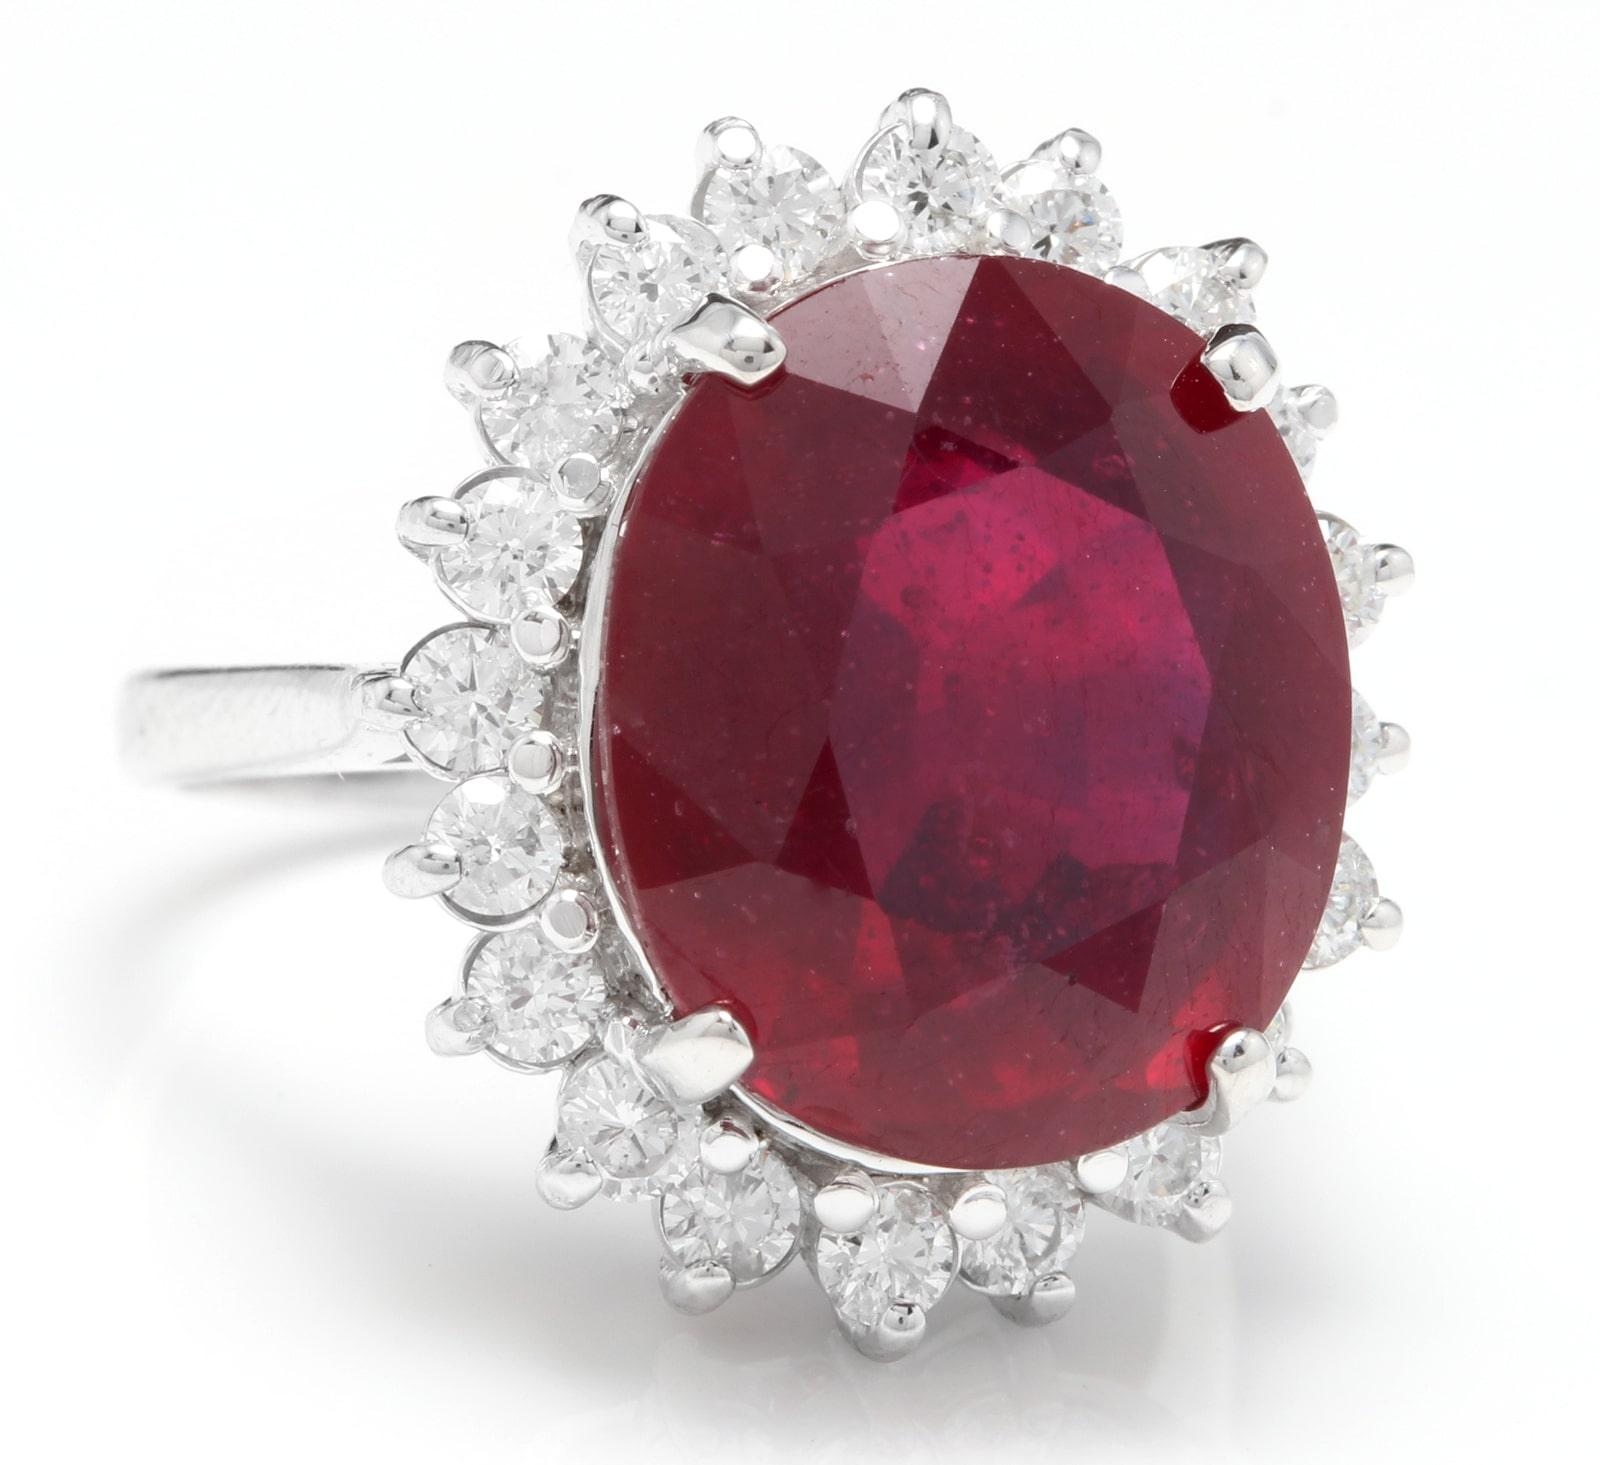 14.05 Carats Impressive Red Ruby and Natural Diamond 14K White Gold Ring

Suggested Replacement Value: $6,800.00

Total Red Ruby Weight is: Approx. 13.00 Carats

Ruby Treatment: Lead Glass Filling

Ruby Measures: Approx. 14.50 x 12.50mm

Natural